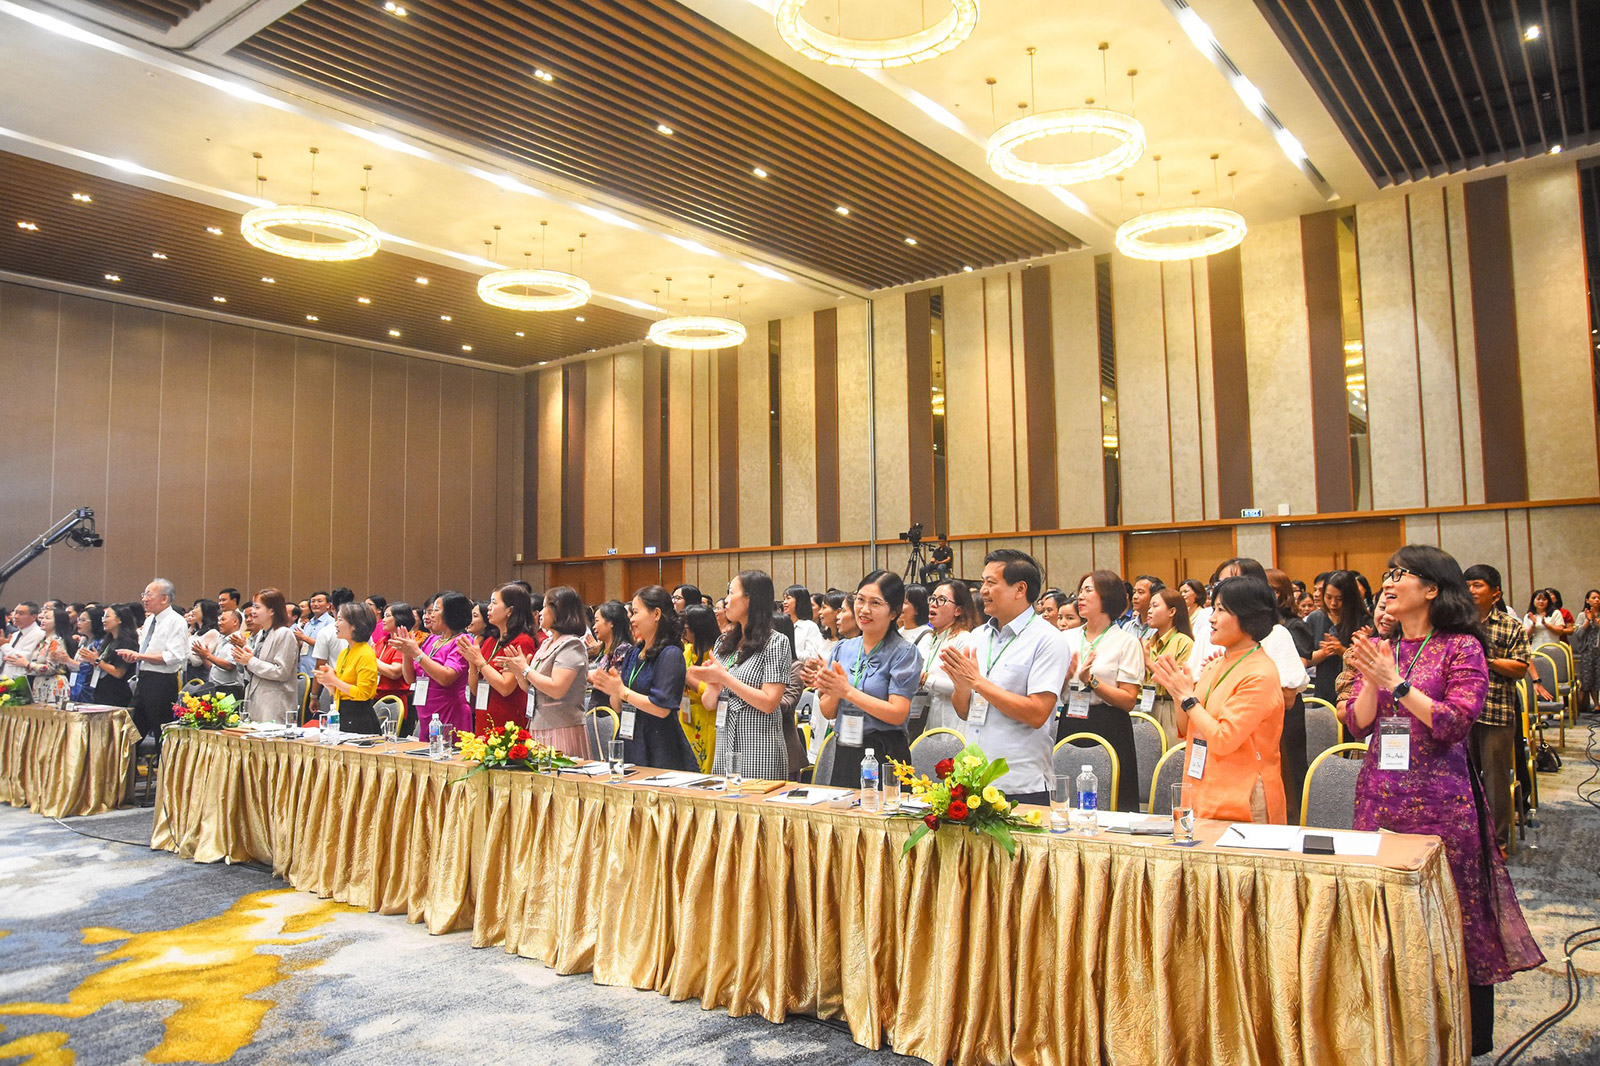 HOW TO CREATE A HAPPY SCHOOL ENVIRONMENT WAS PUT IN THE SPOTLIGHT AT AN EDUCATIONAL WORKSHOP TOOK PLACE AT ARIYANA CONVENTION CENTRE DANANG